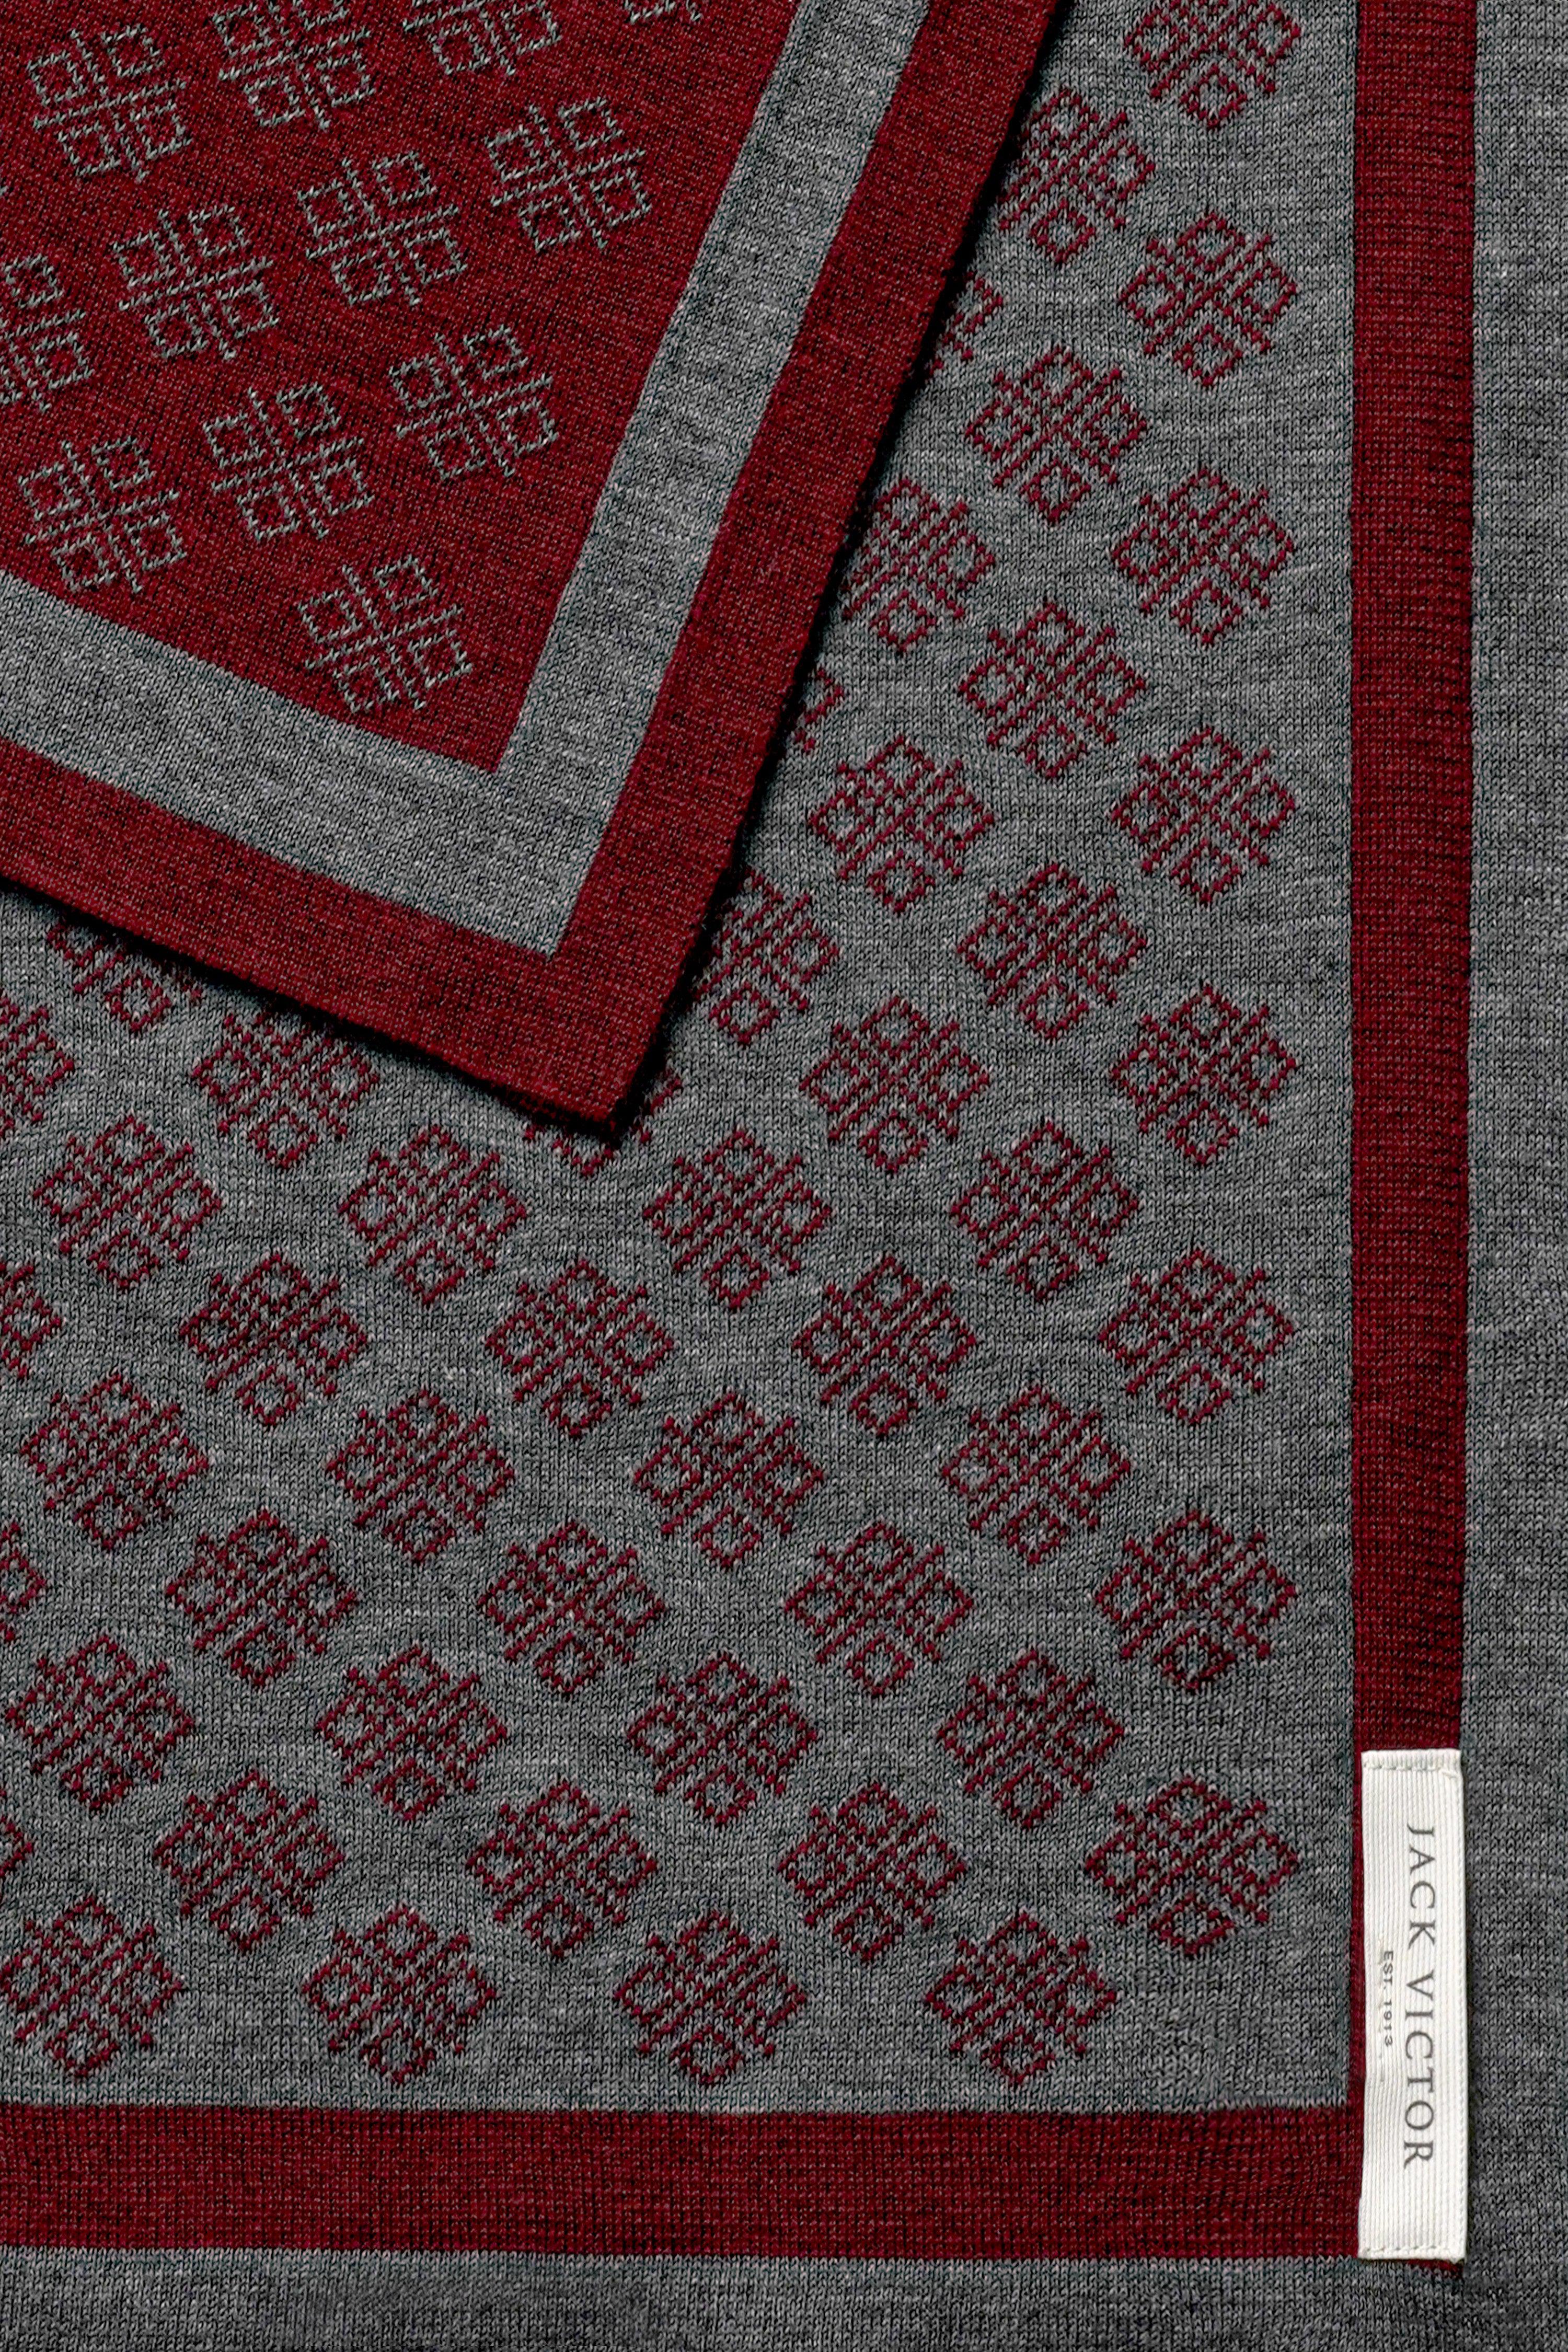 Alt view 1 Jacquard Cotton and Silk Knit Scarf in Burgundy